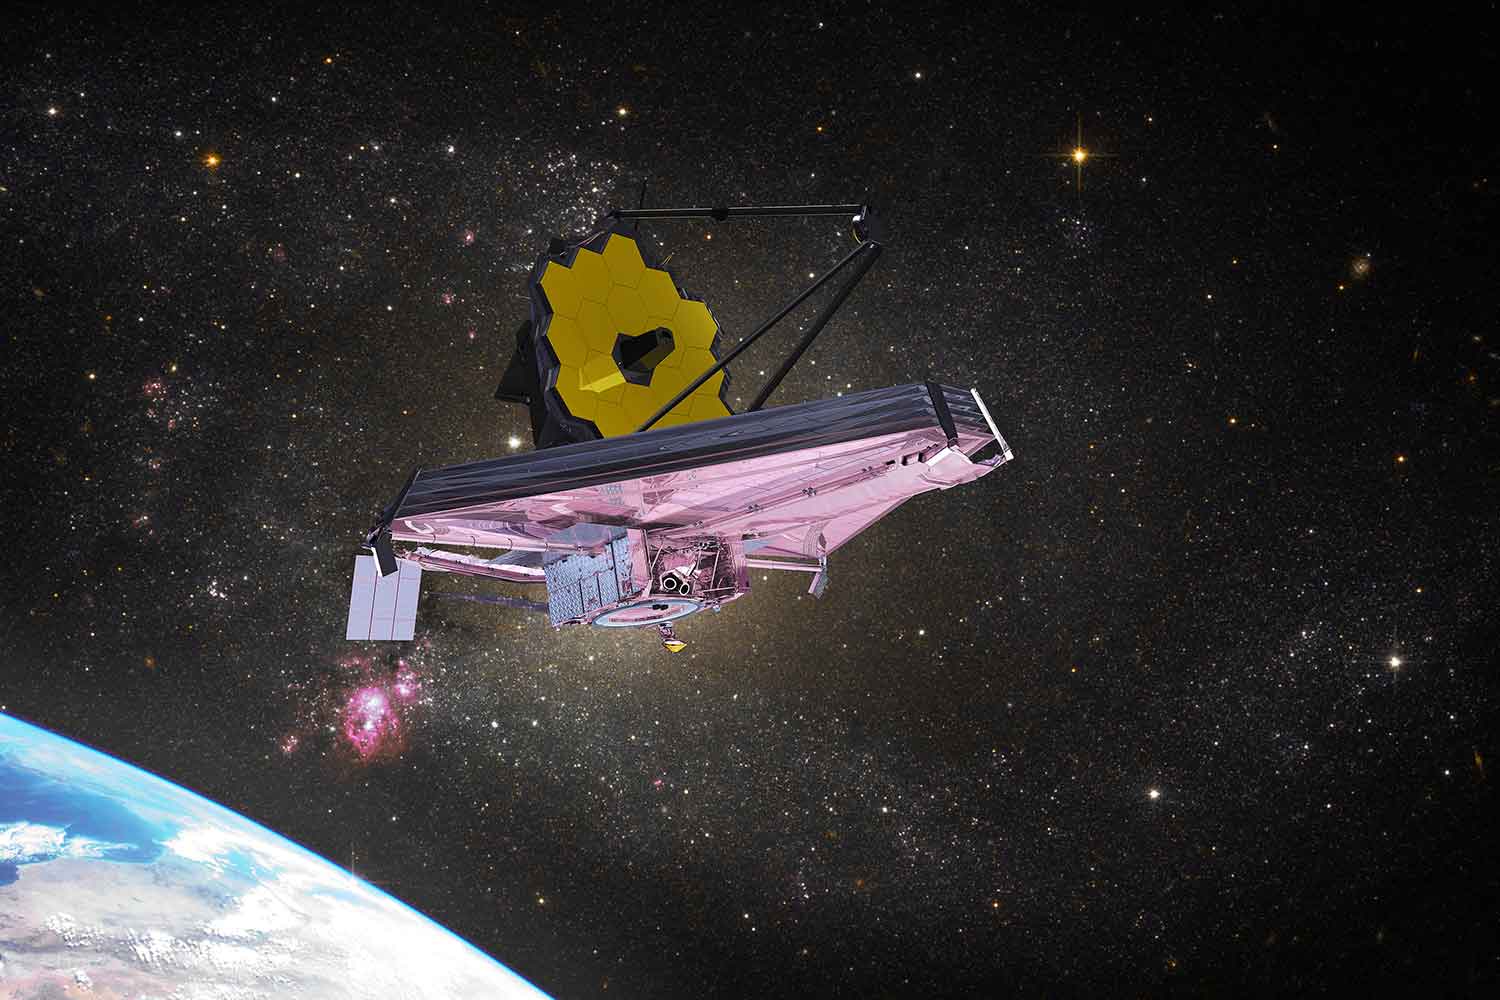 Illustration of the James Webb Space Telescope in orbit above Earth